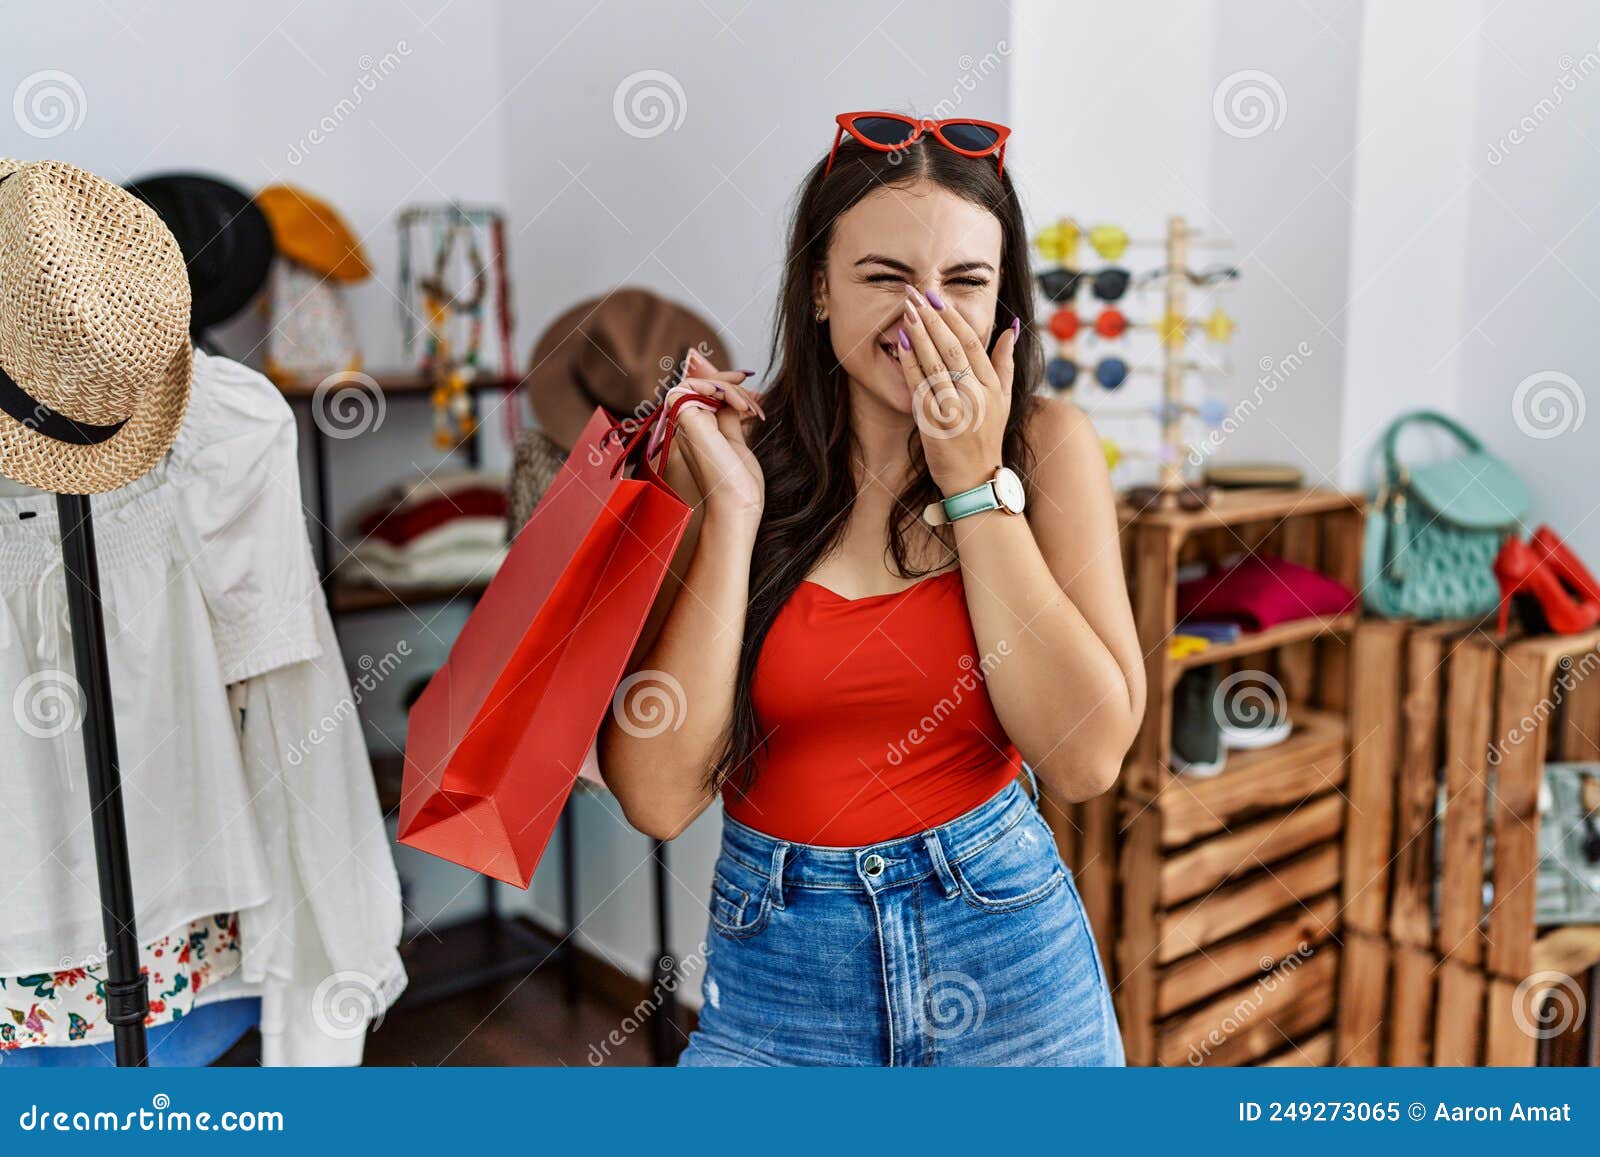 Young Brunette Woman Holding Shopping Bags at Retail Shop Laughing and ...